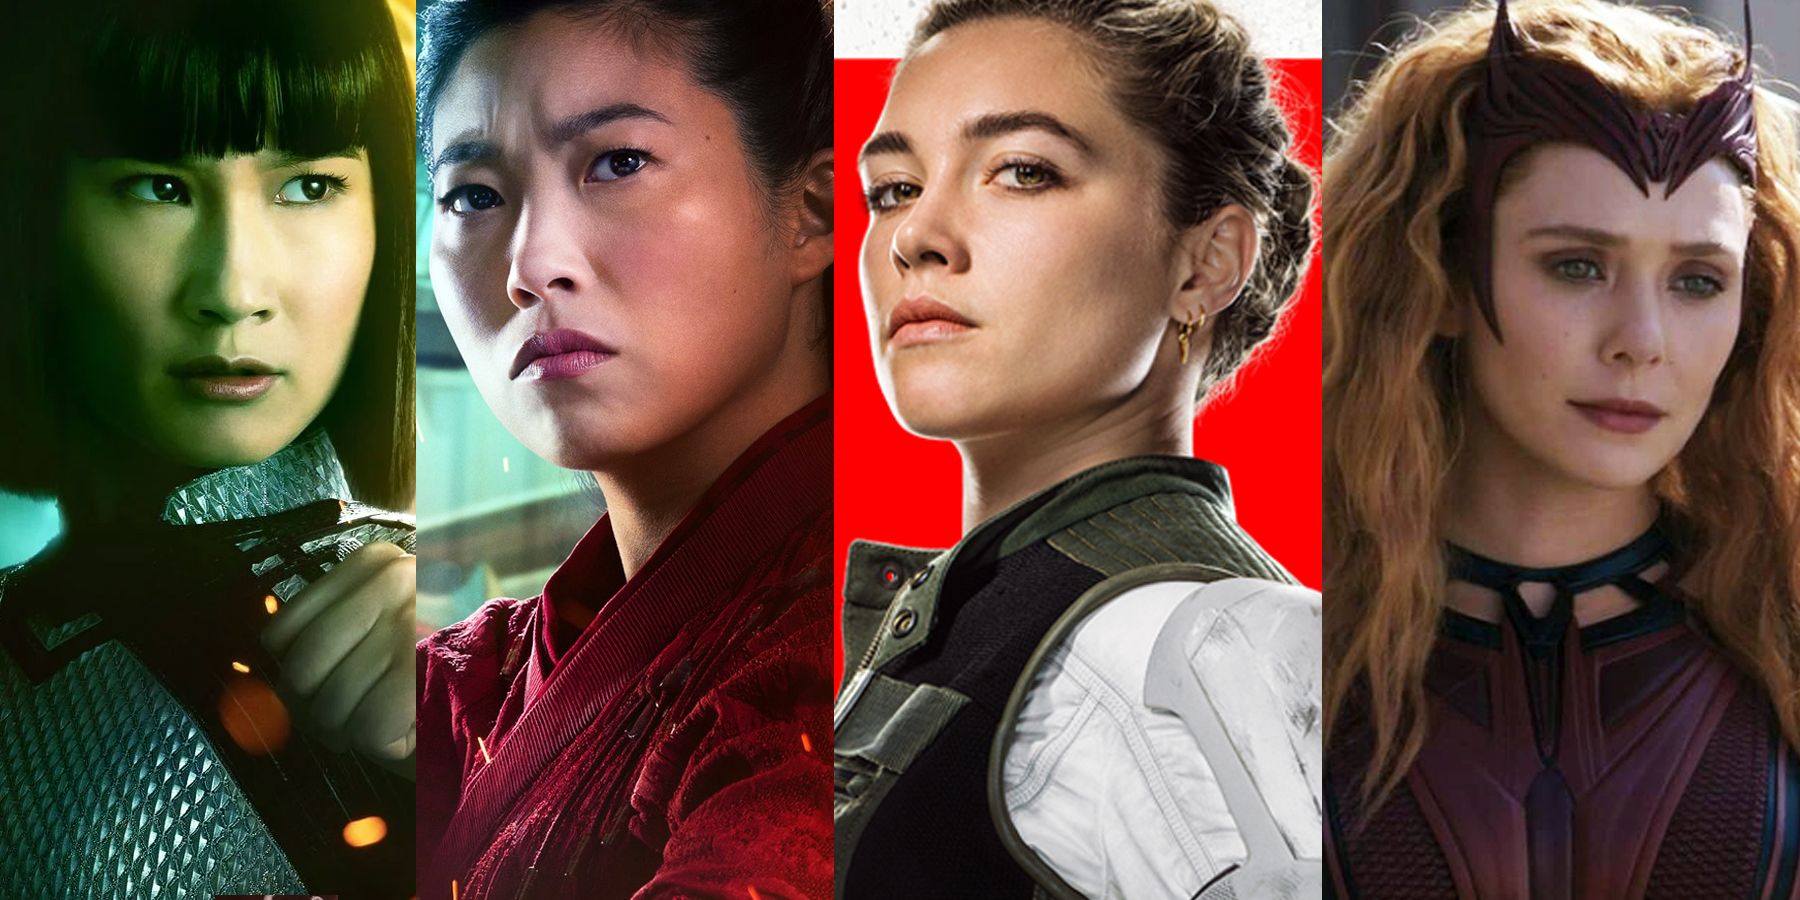 Female heroes are getting more prominence in the MCU